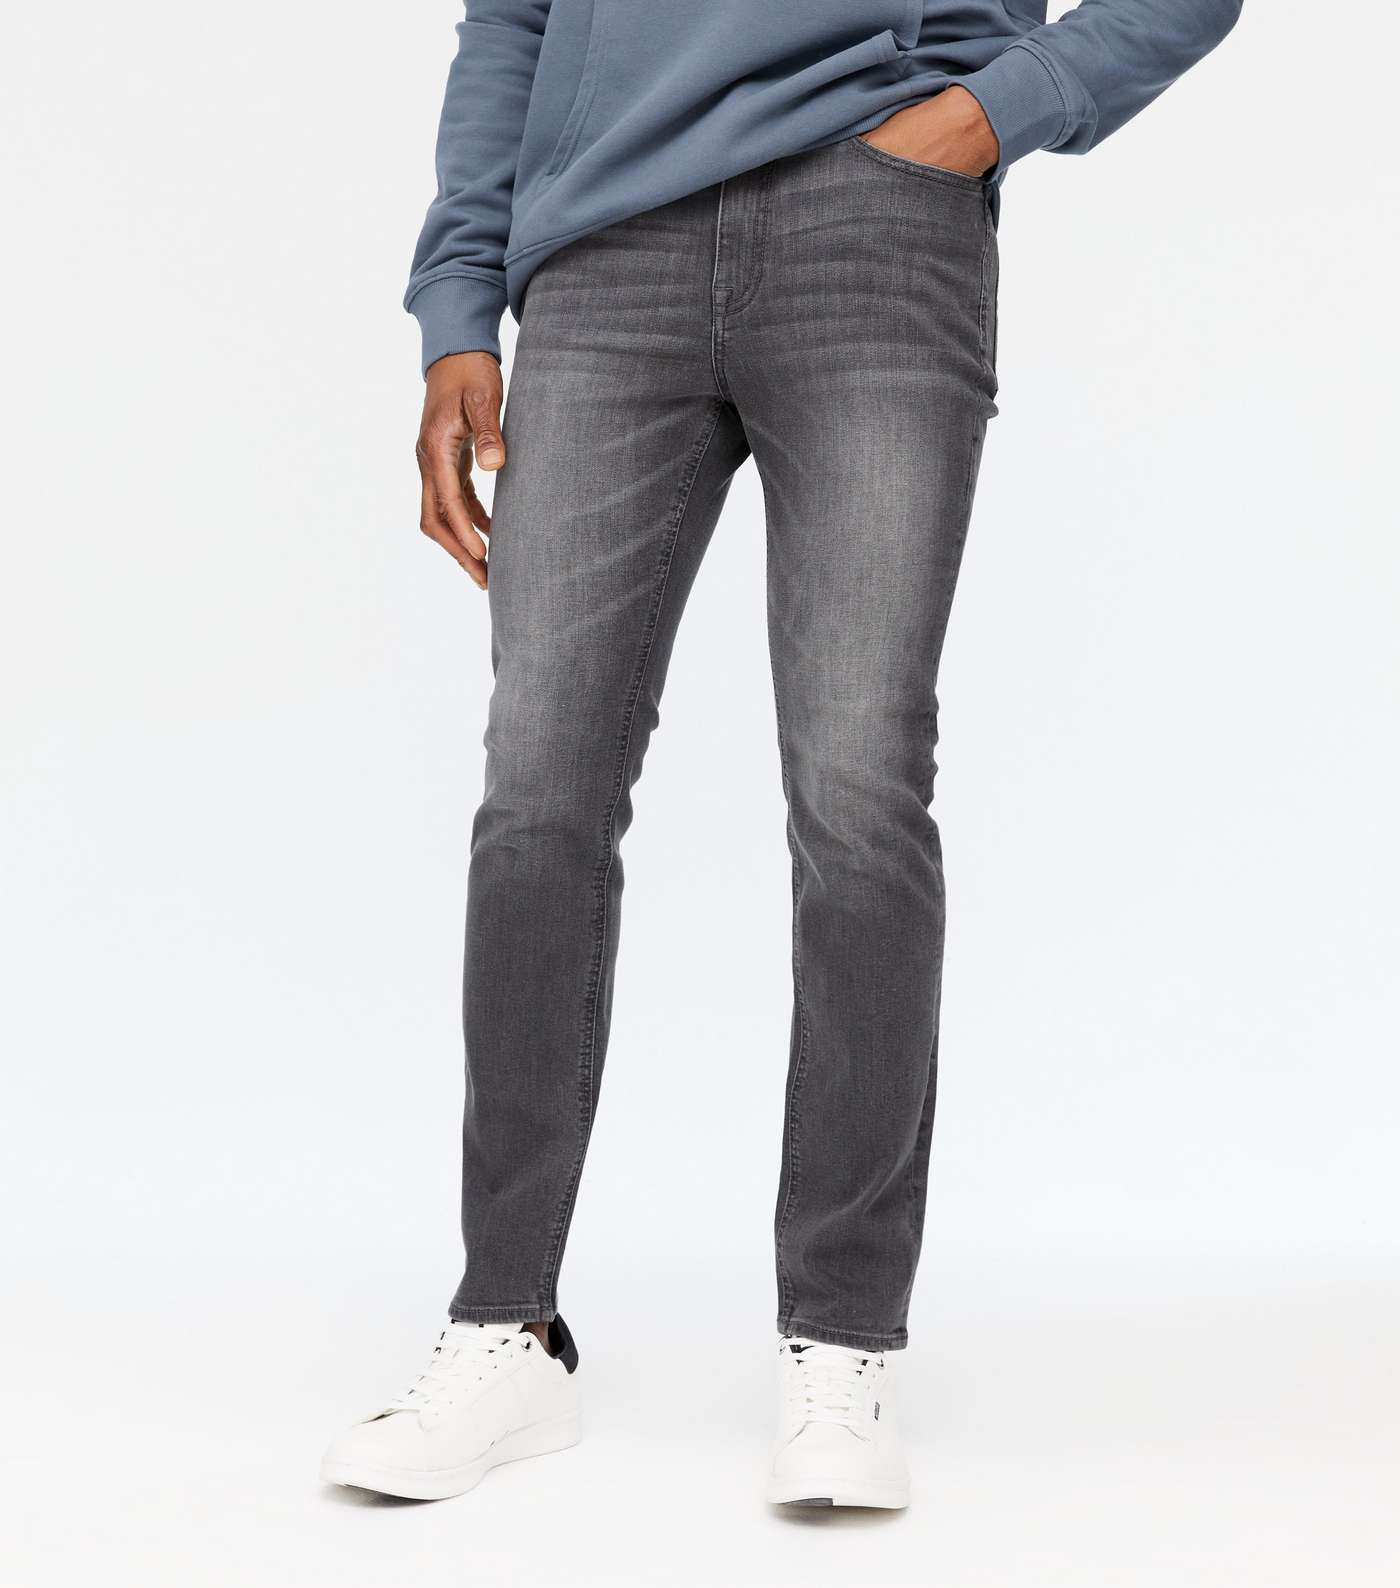 Pale Grey Washed Slim Stretch Jeans Image 2